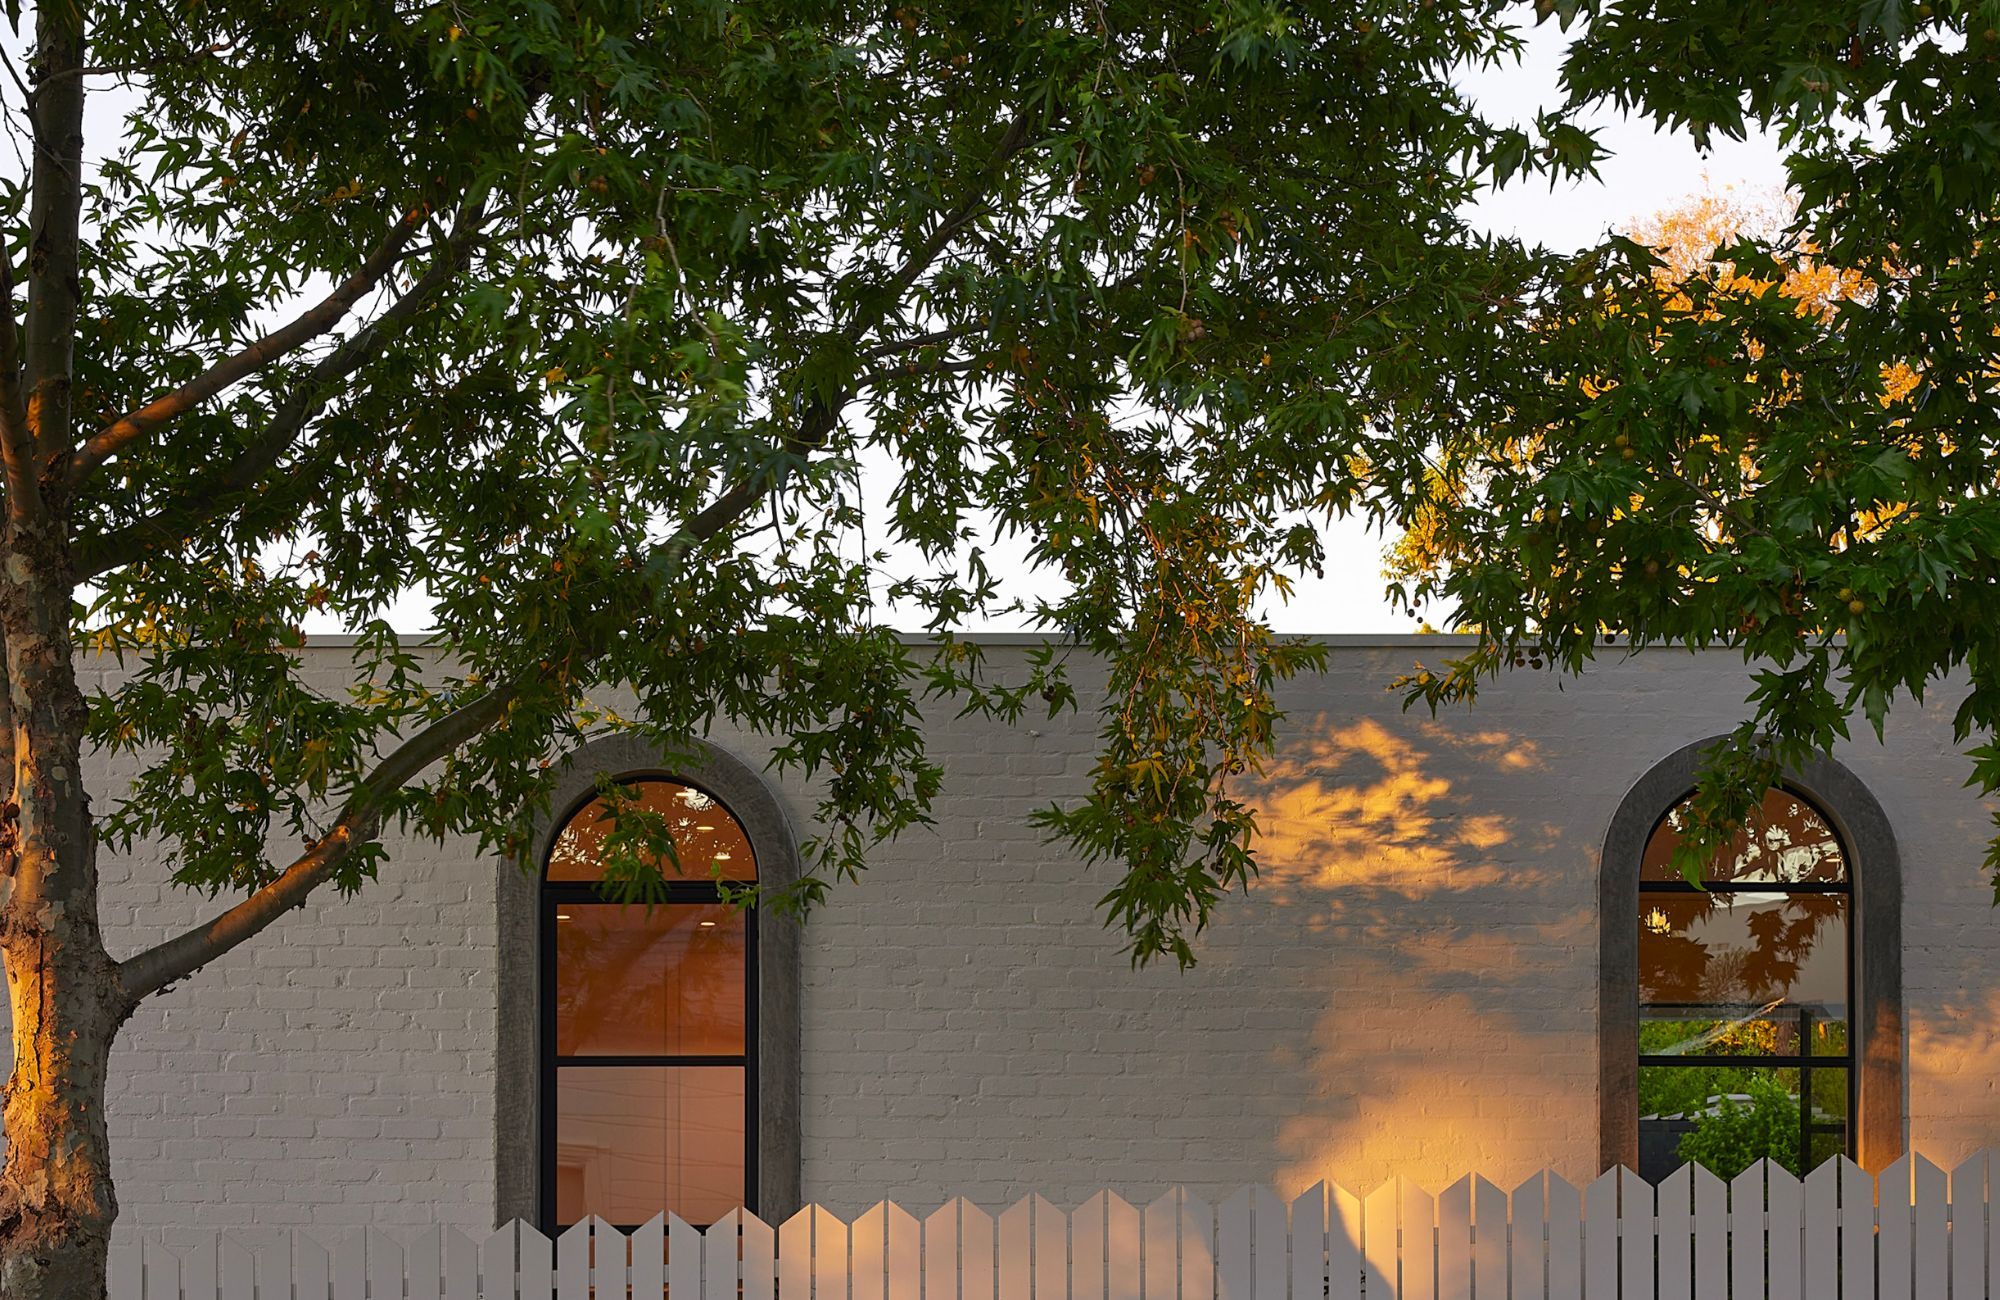 Willow by Castley McCrimmon Architects showing exterior brickwork and arch windows